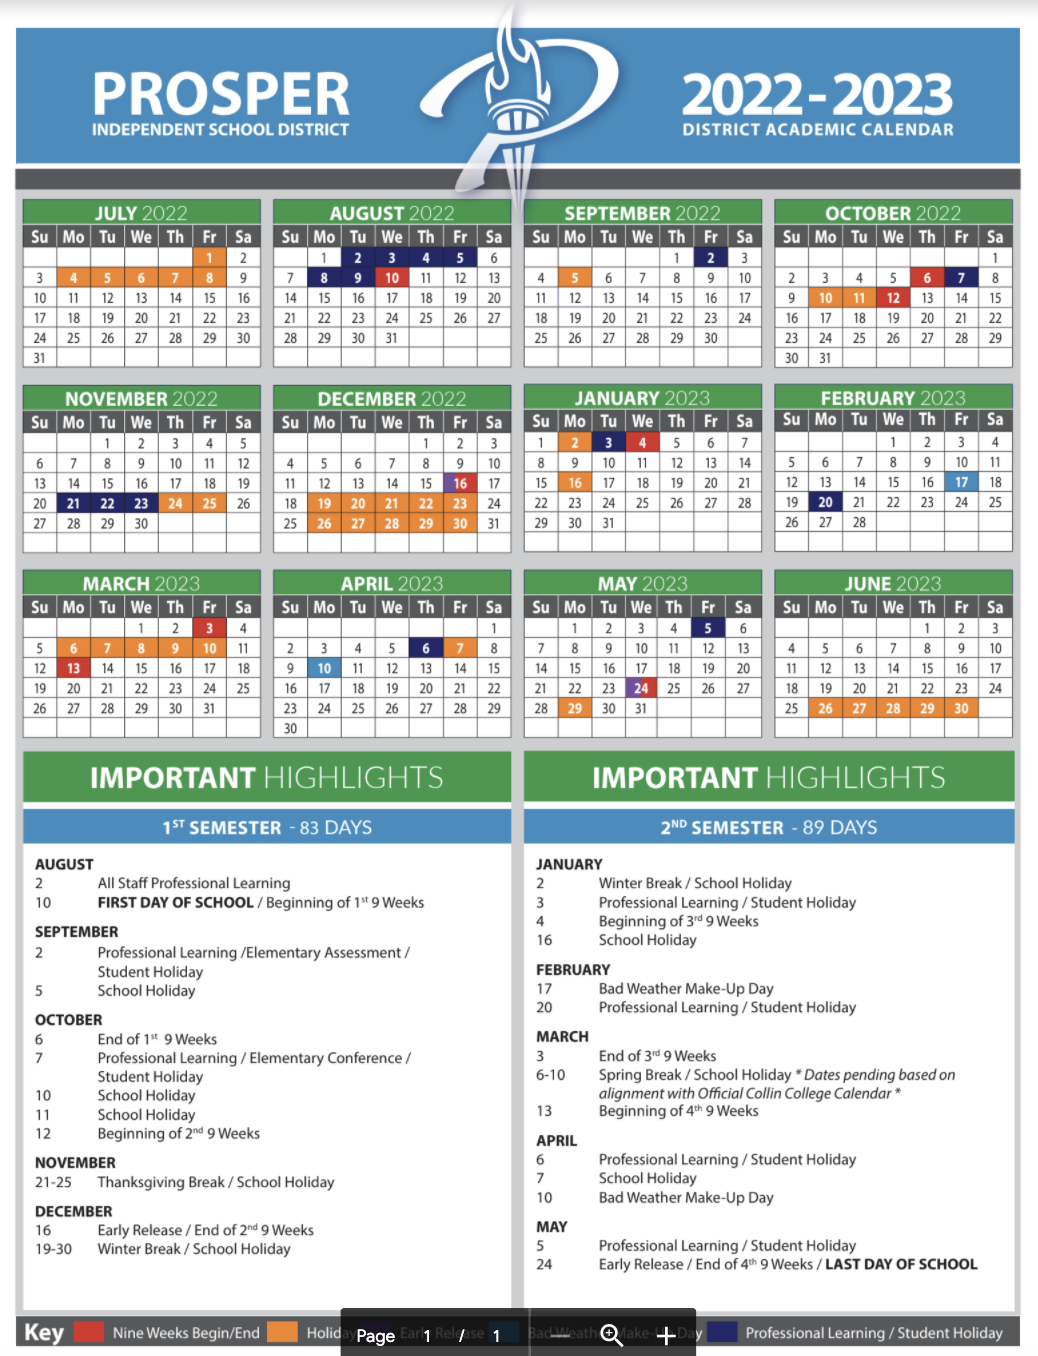 Frisco Isd Calendar 2022 2023 Here Are Prosper Isd's School Calendars For The 2022-2023 And The 2023-2024  School Years | Cities | Checkoutdfw.com